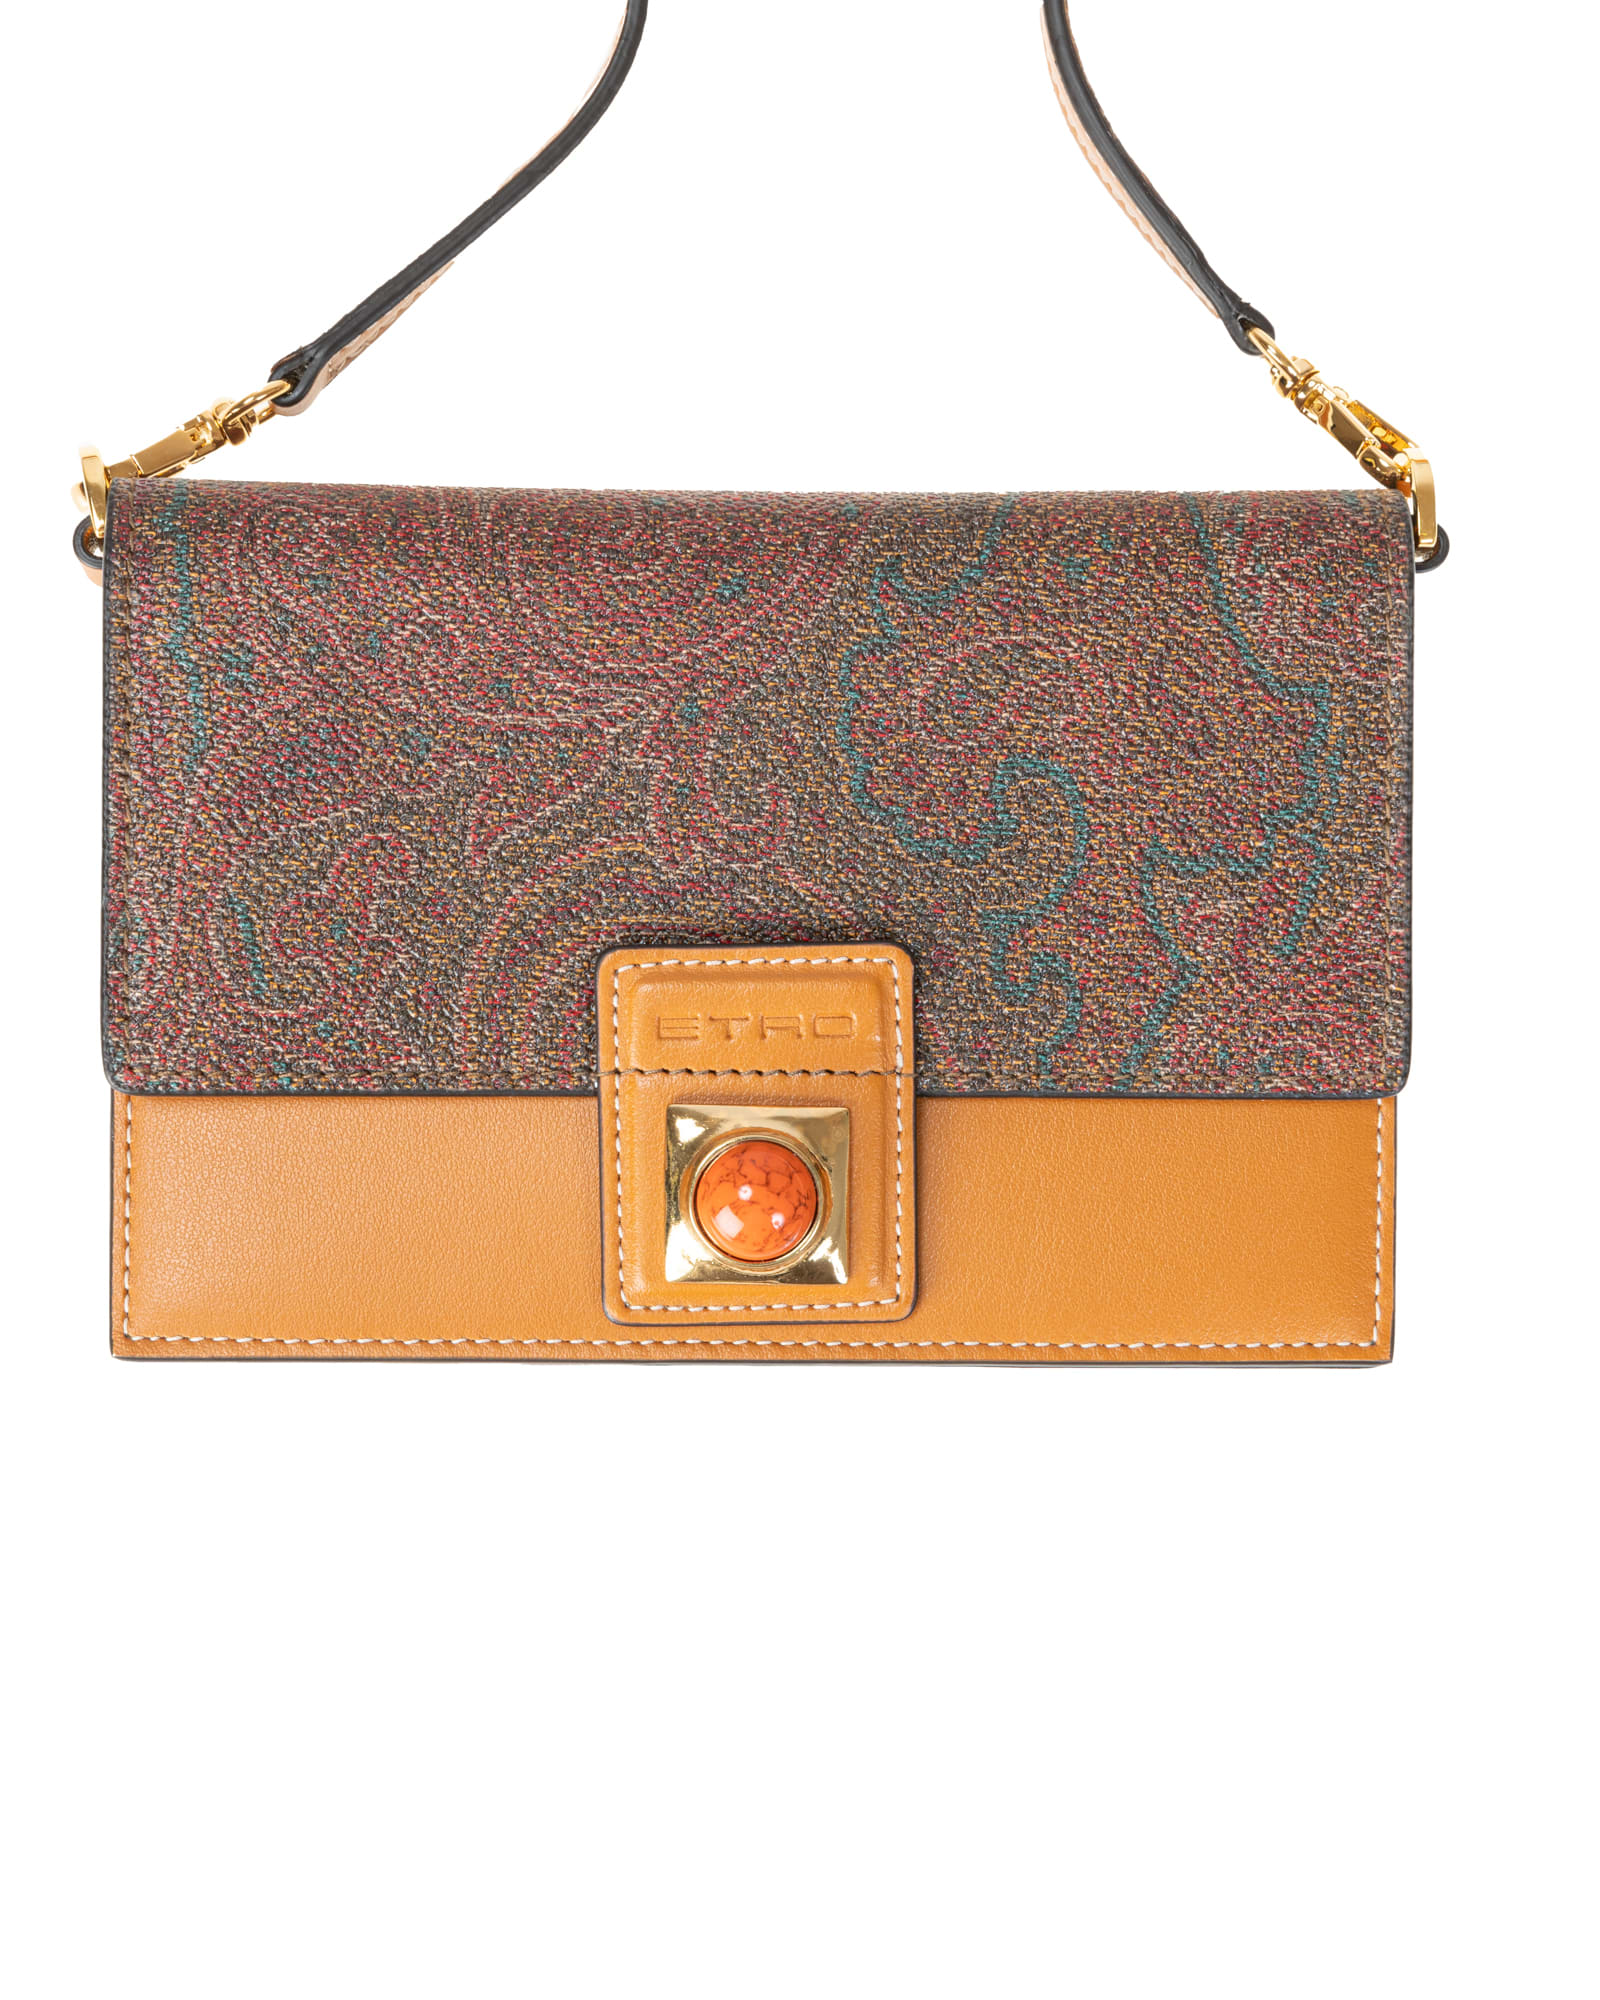 Etro Shoulder Bag From The Crown Me Collection